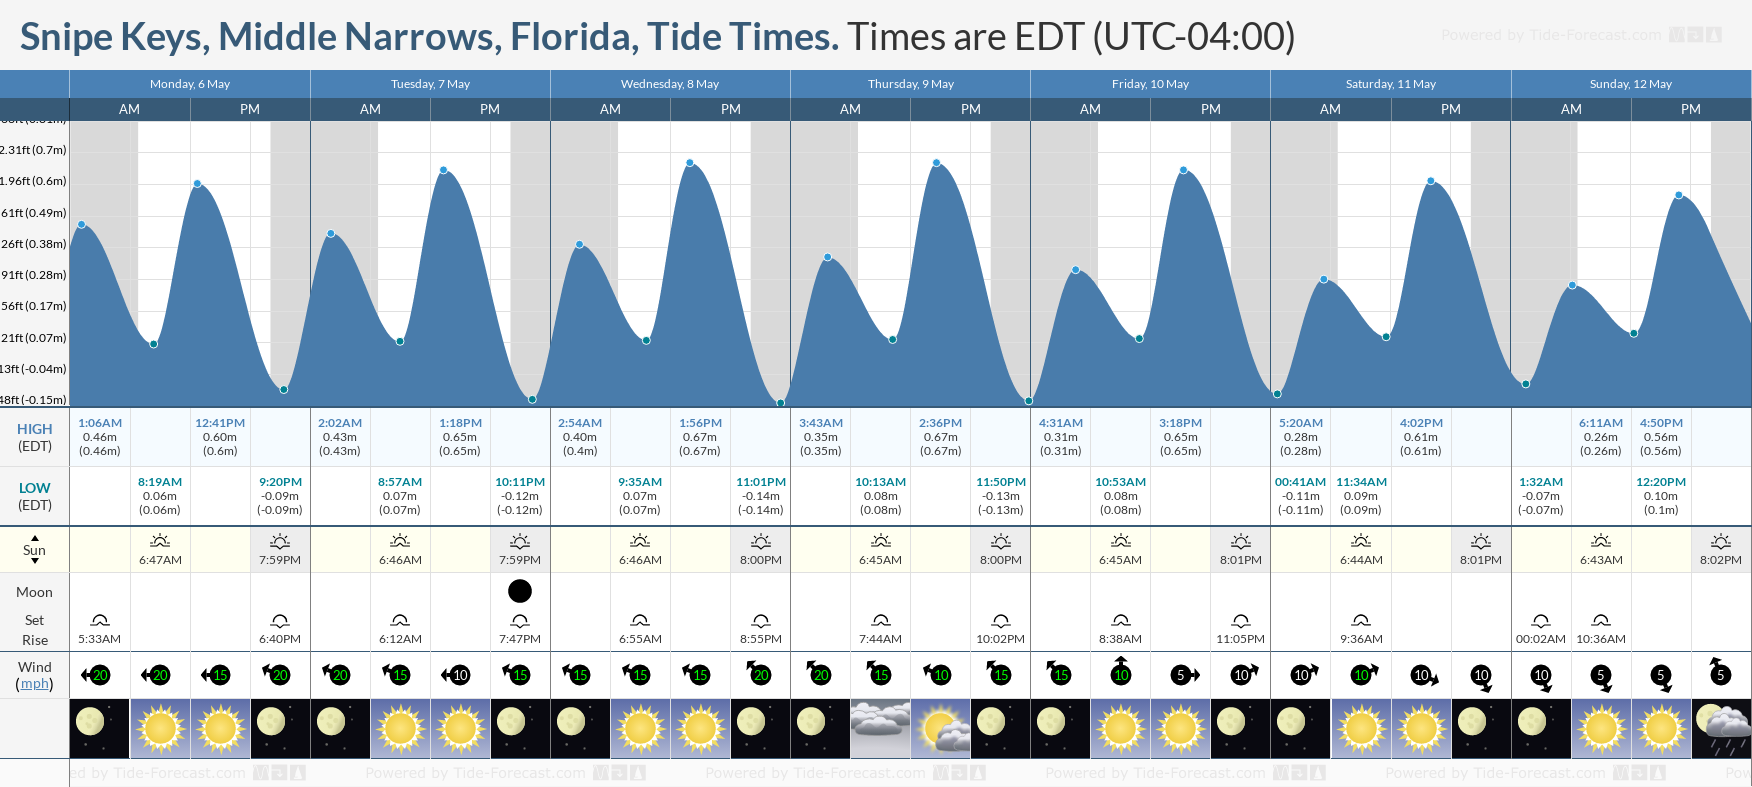 Snipe Keys, Middle Narrows, Florida Tide Chart including high and low tide tide times for the next 7 days